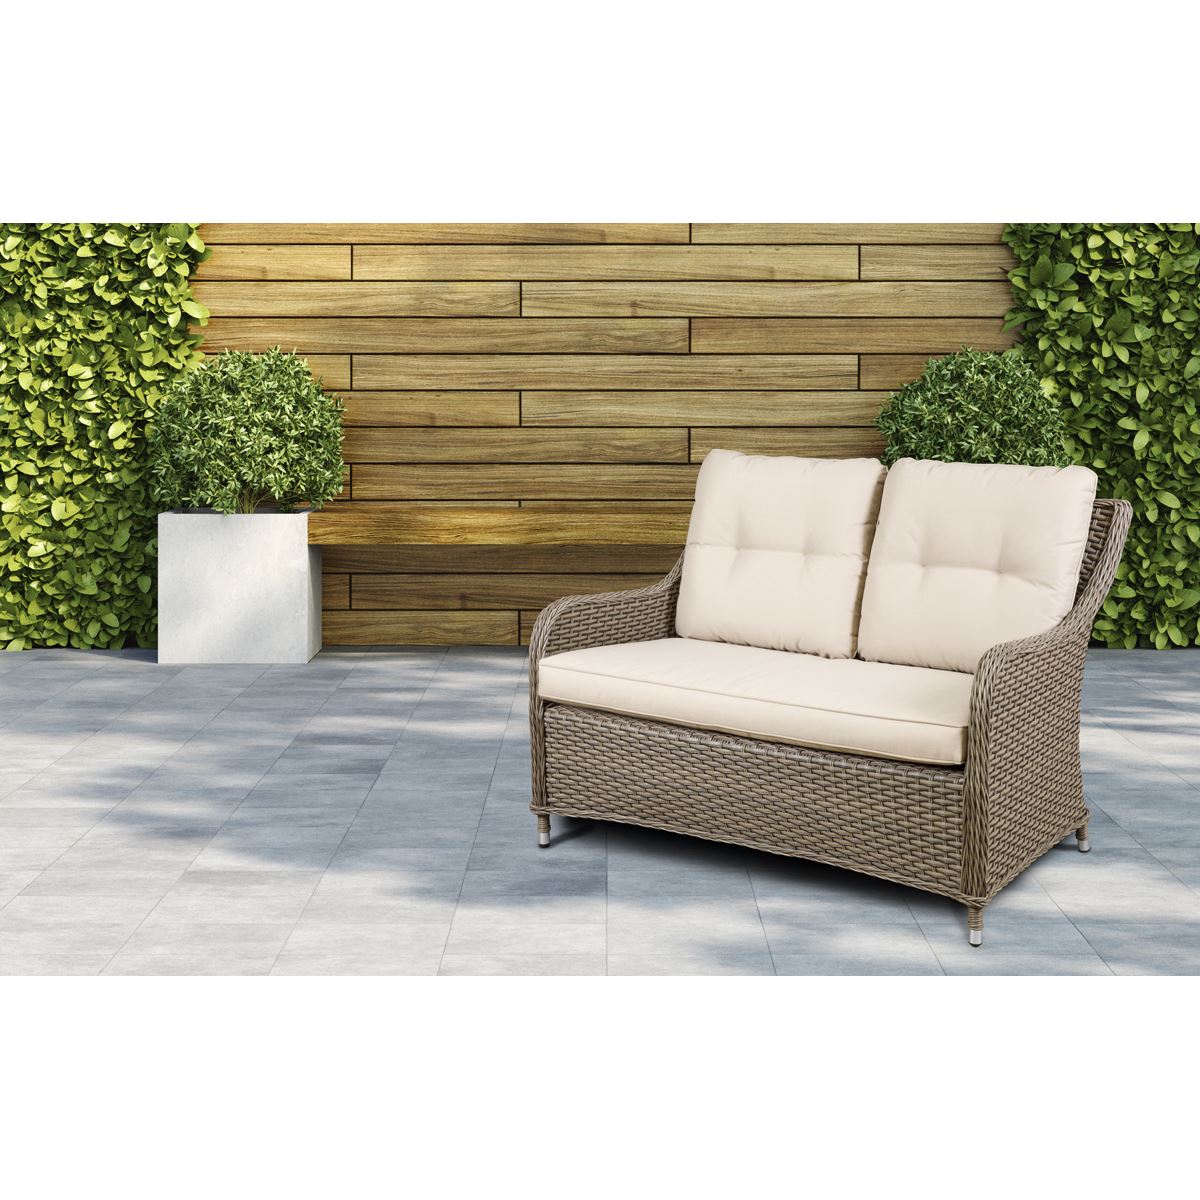 Dellonda Chester Rattan Wicker Outdoor Lounge 2-Seater Sofa with Cushion, Brown